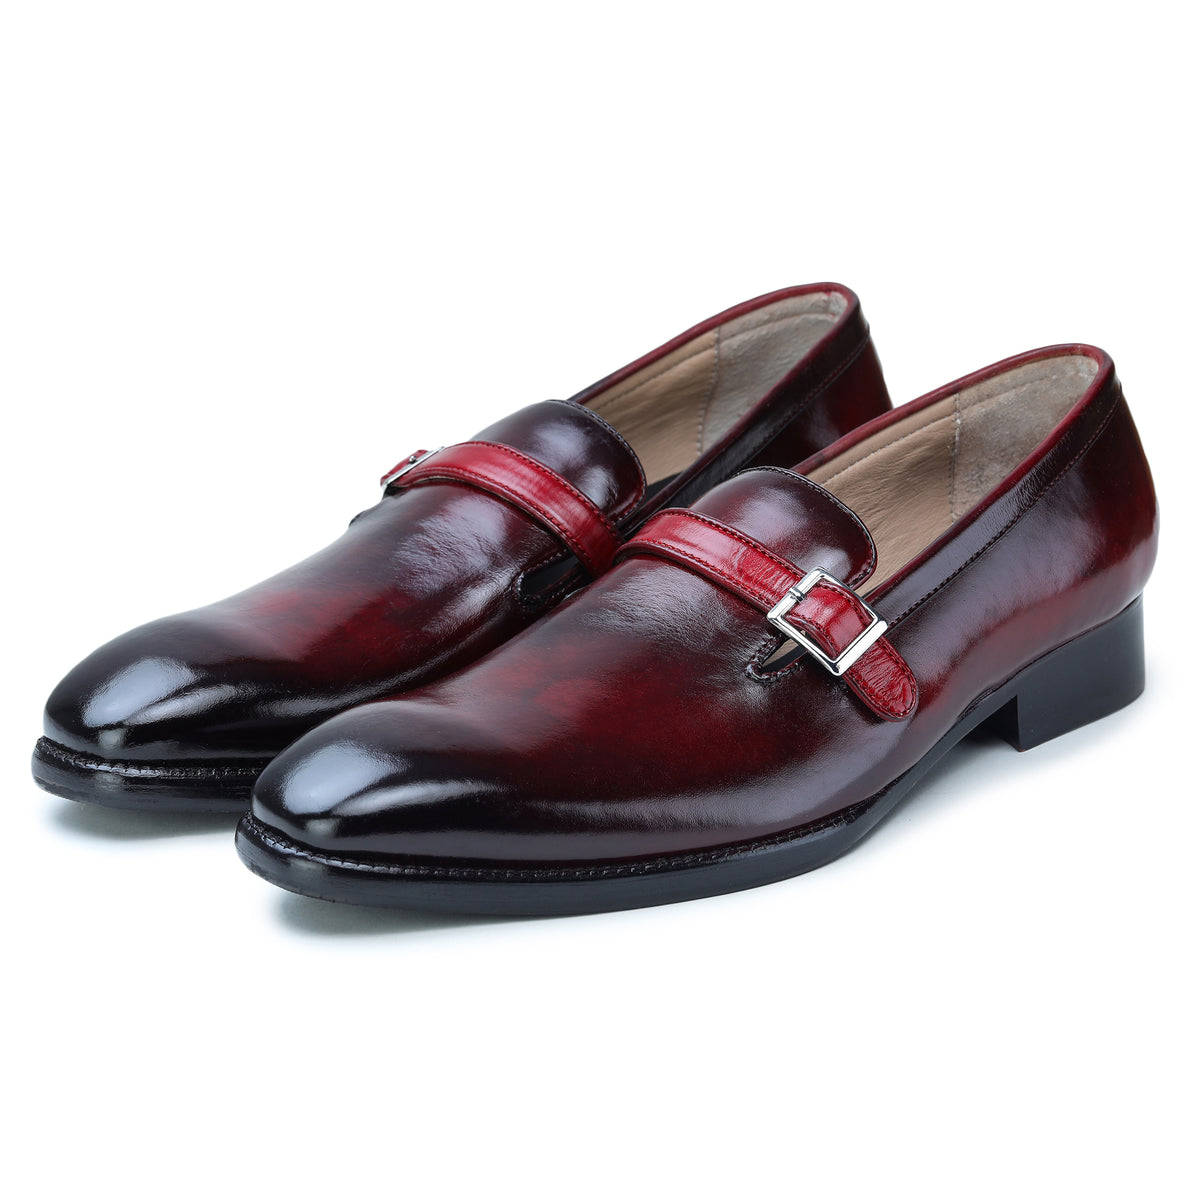 Men's Single Monk Strap Loafers - Wine Red by Lethato